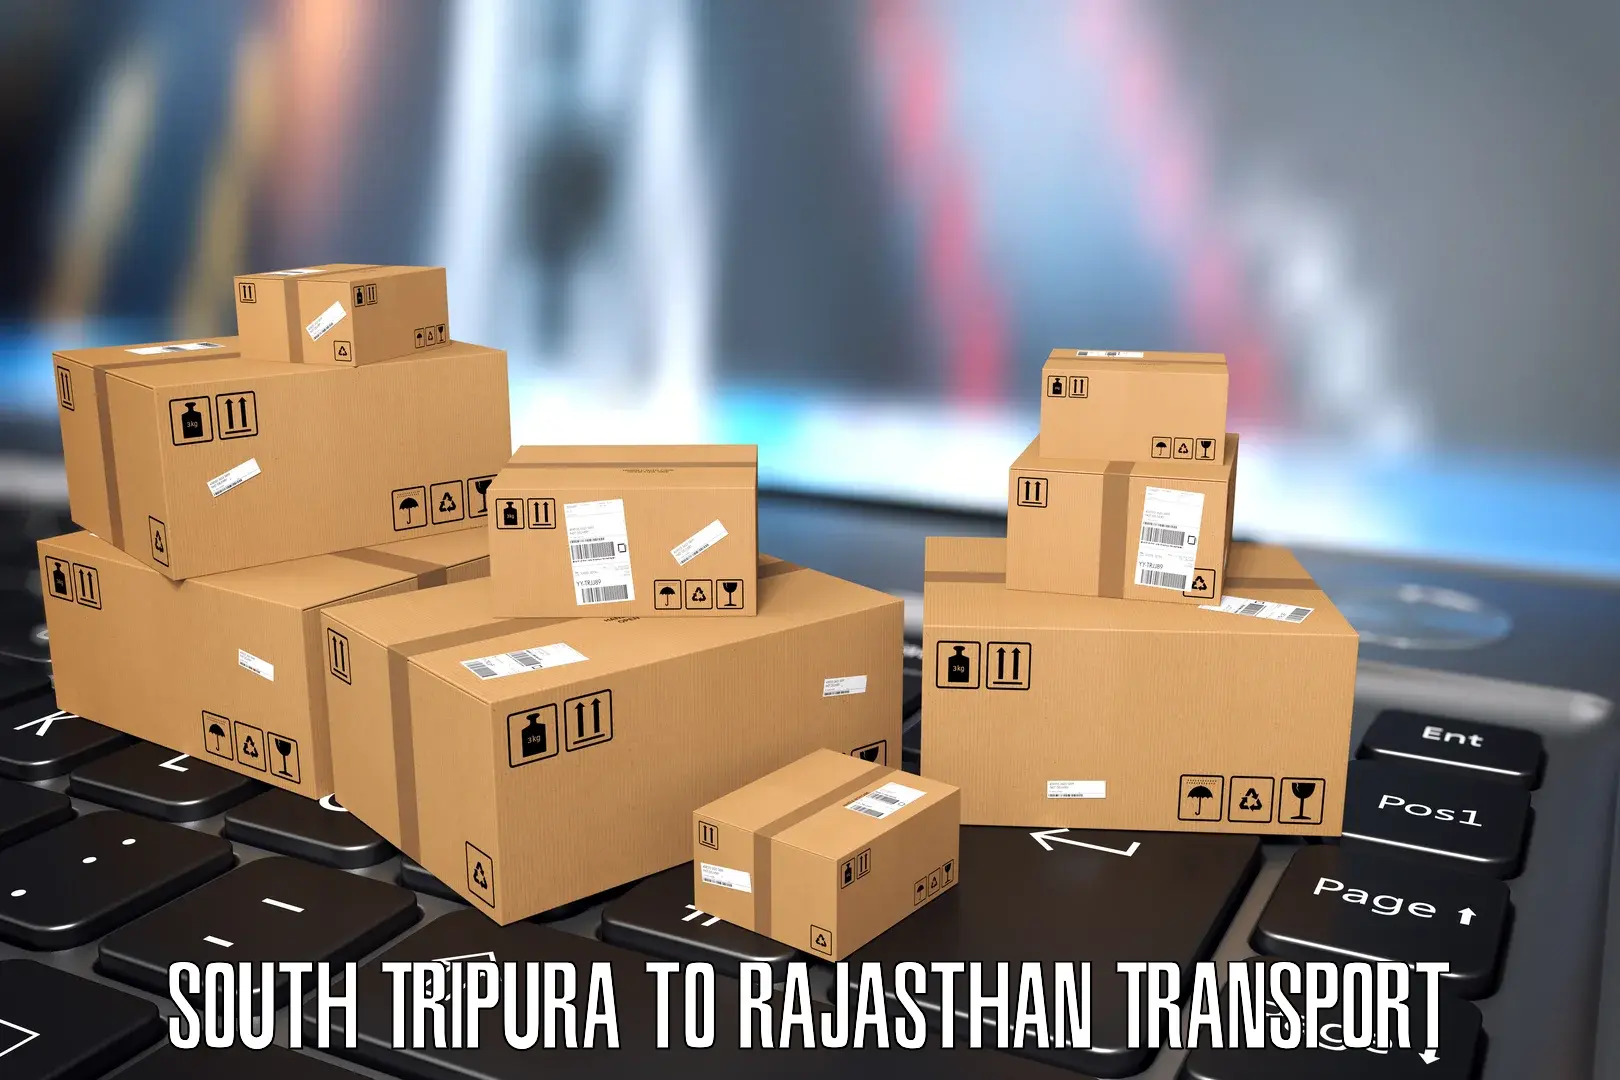 Package delivery services South Tripura to Mathania